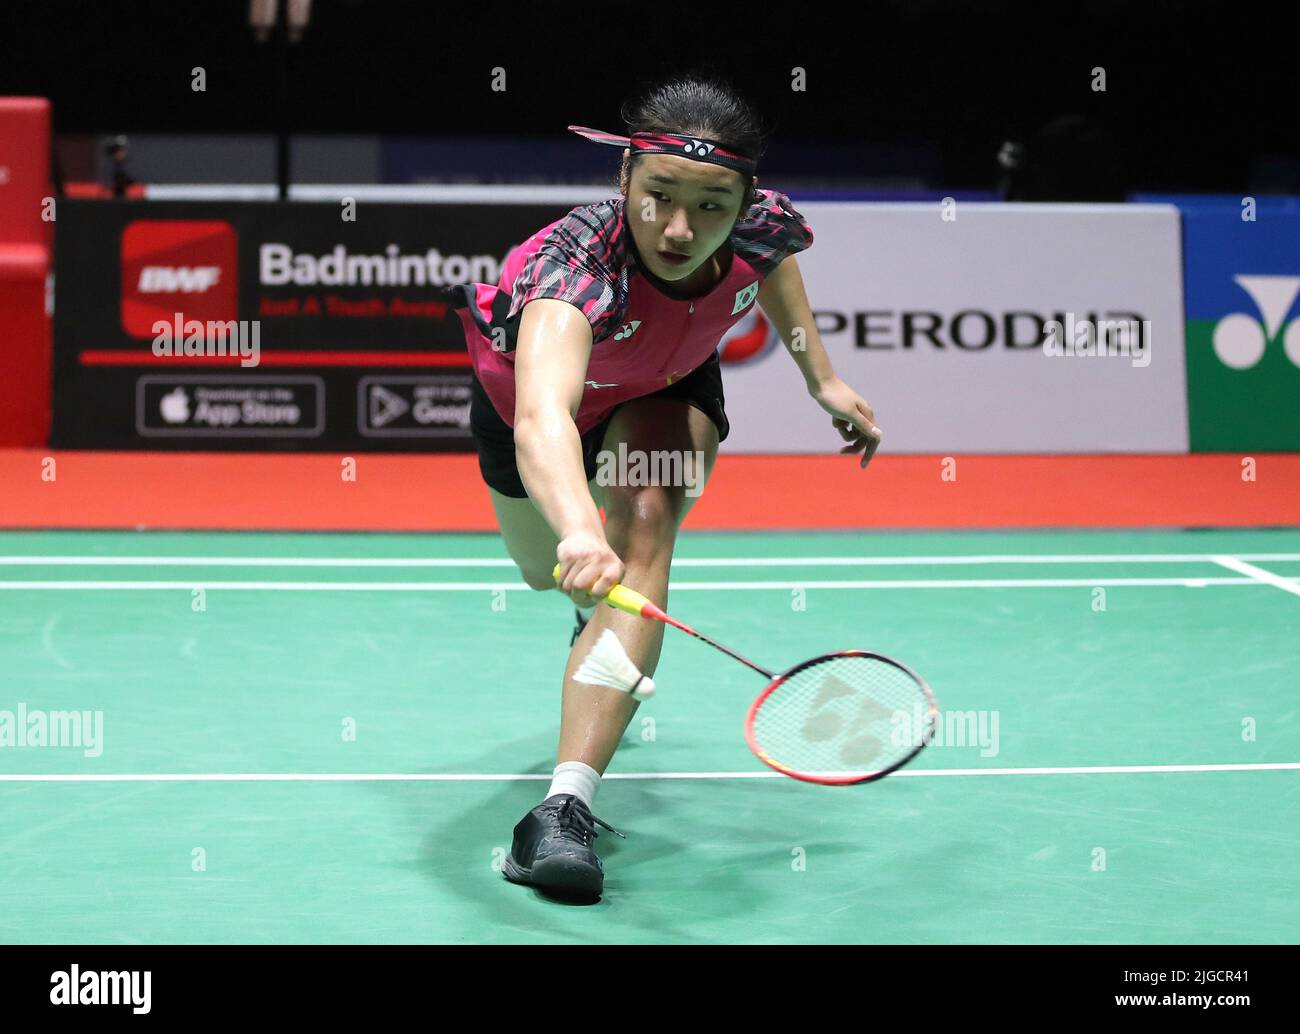 An Se Young of Korea competes against Ratchanok Intanon of Thailand during the Womens Single semi-finals match of the Perodua Malaysia Masters 2022 at Axiata Arena, Bukit Jalil